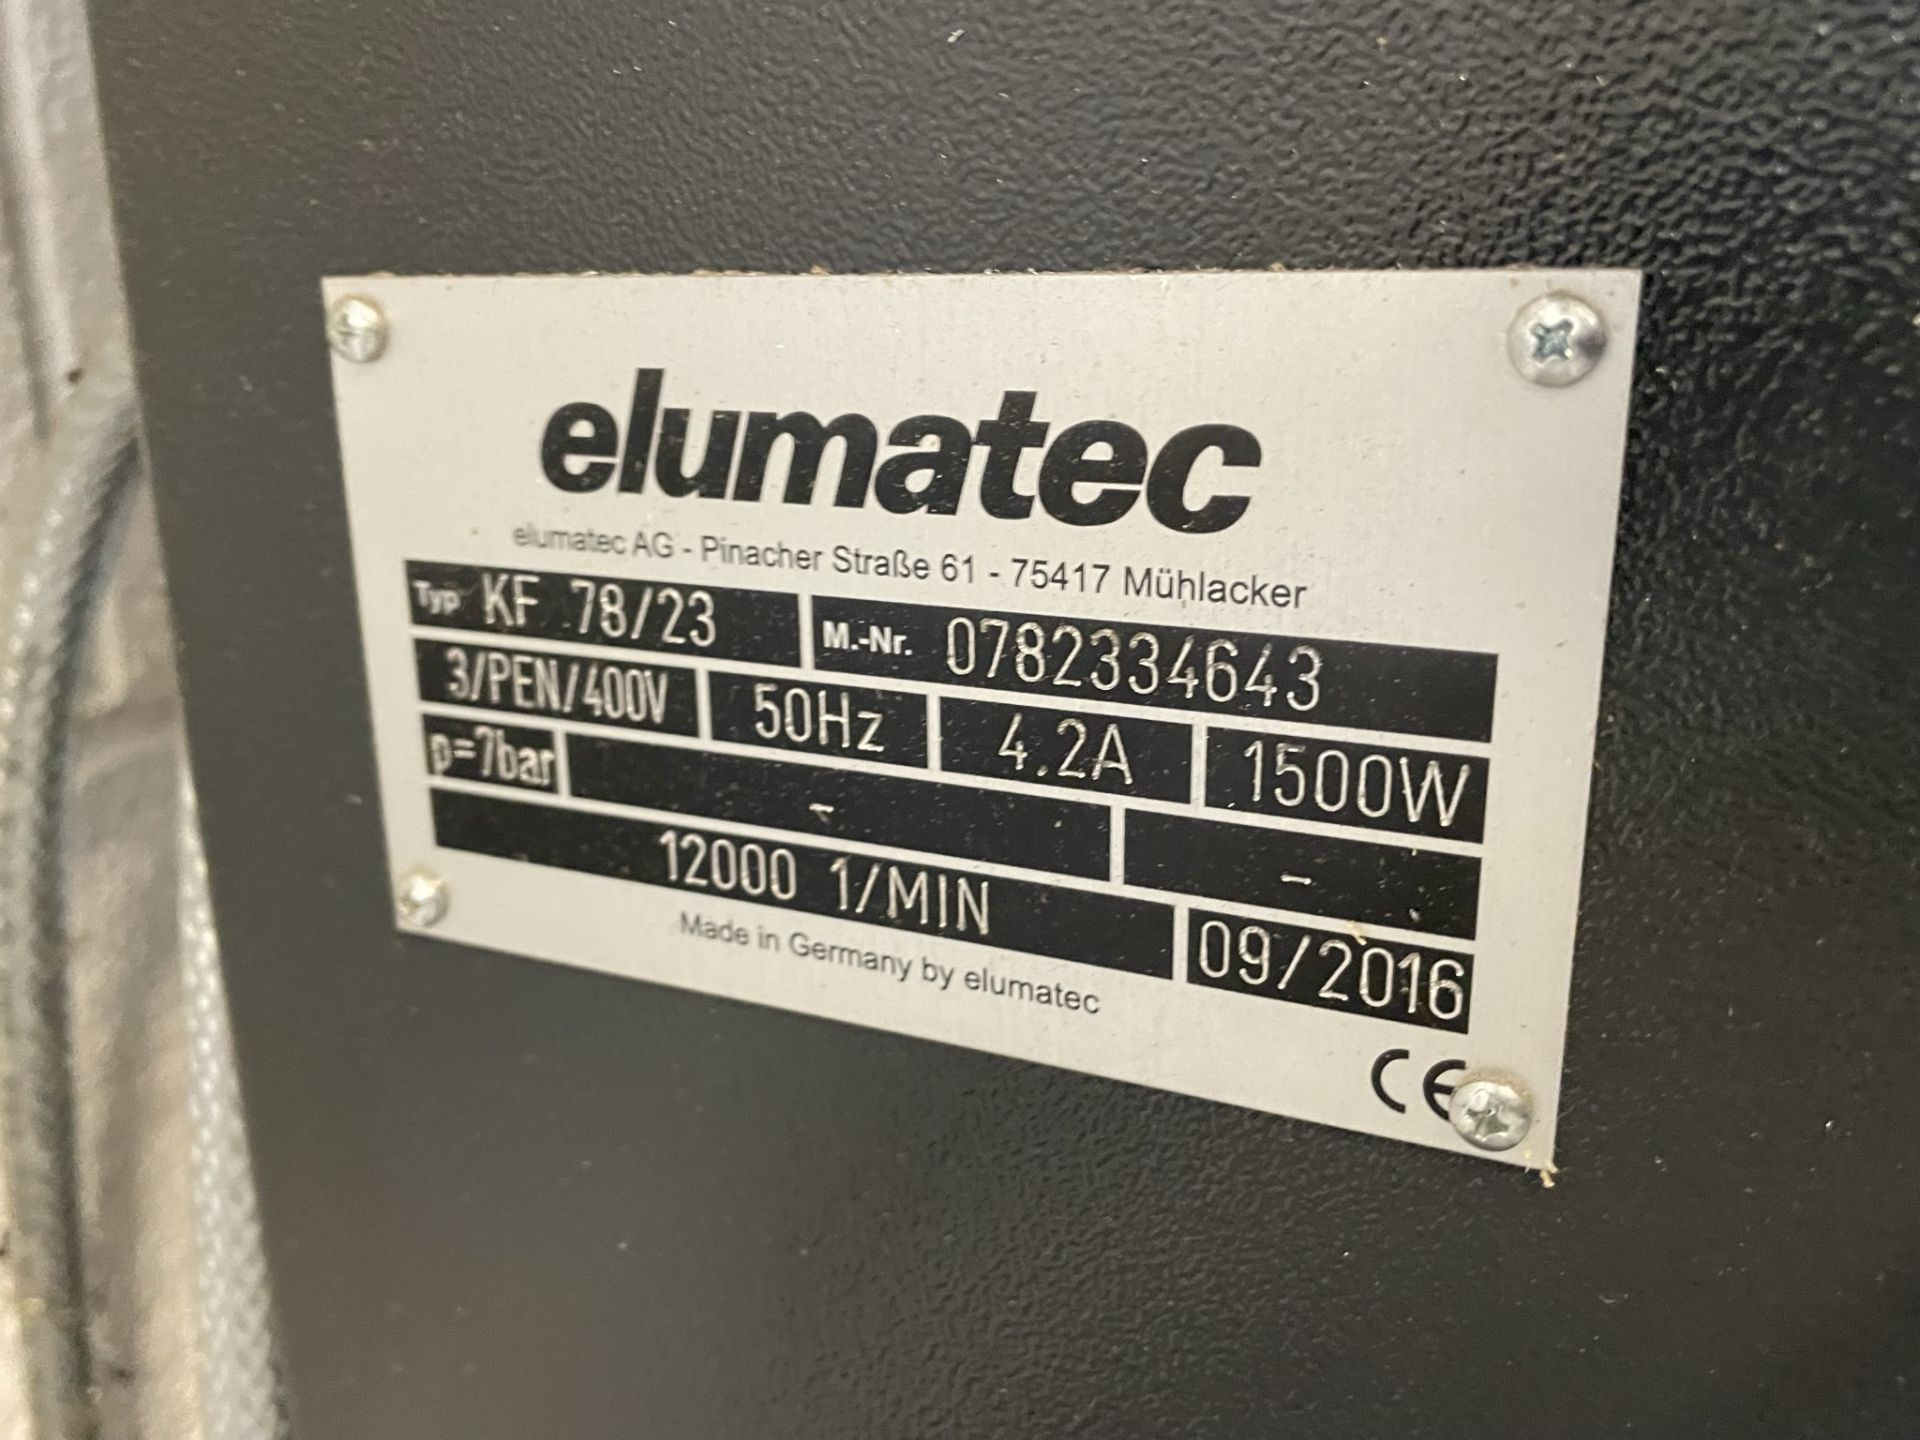 Elumatec, KF78/23 twin spindle copy router, Serial No. 0782334643 (DOM: 2016) - Image 5 of 5